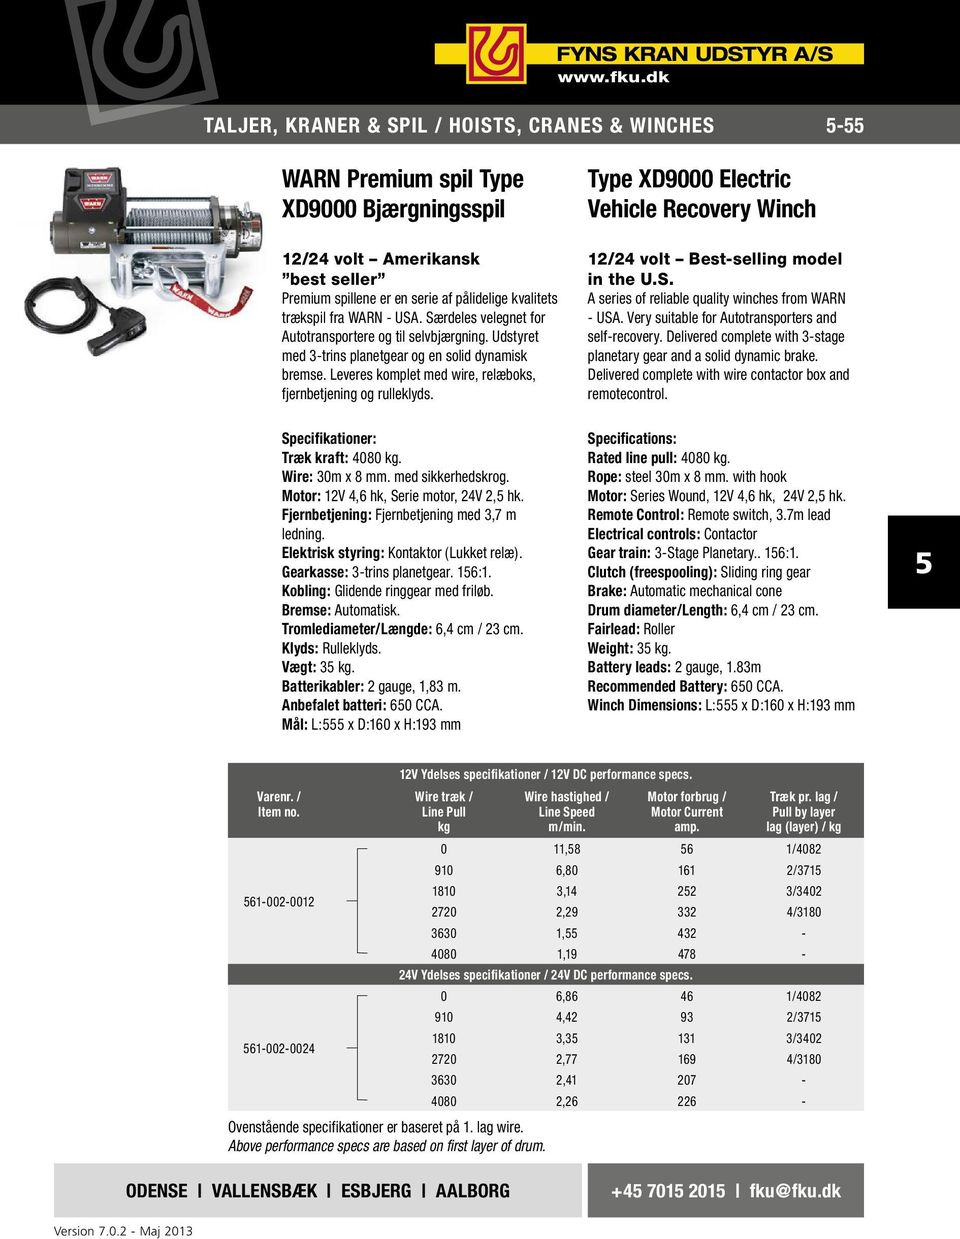 Leveres komplet med wire, relæboks, fjernbetjening og rulleklyds. 12/24 volt Best-selling model in the U.S. A series of reliable quality winches from WARN - USA.